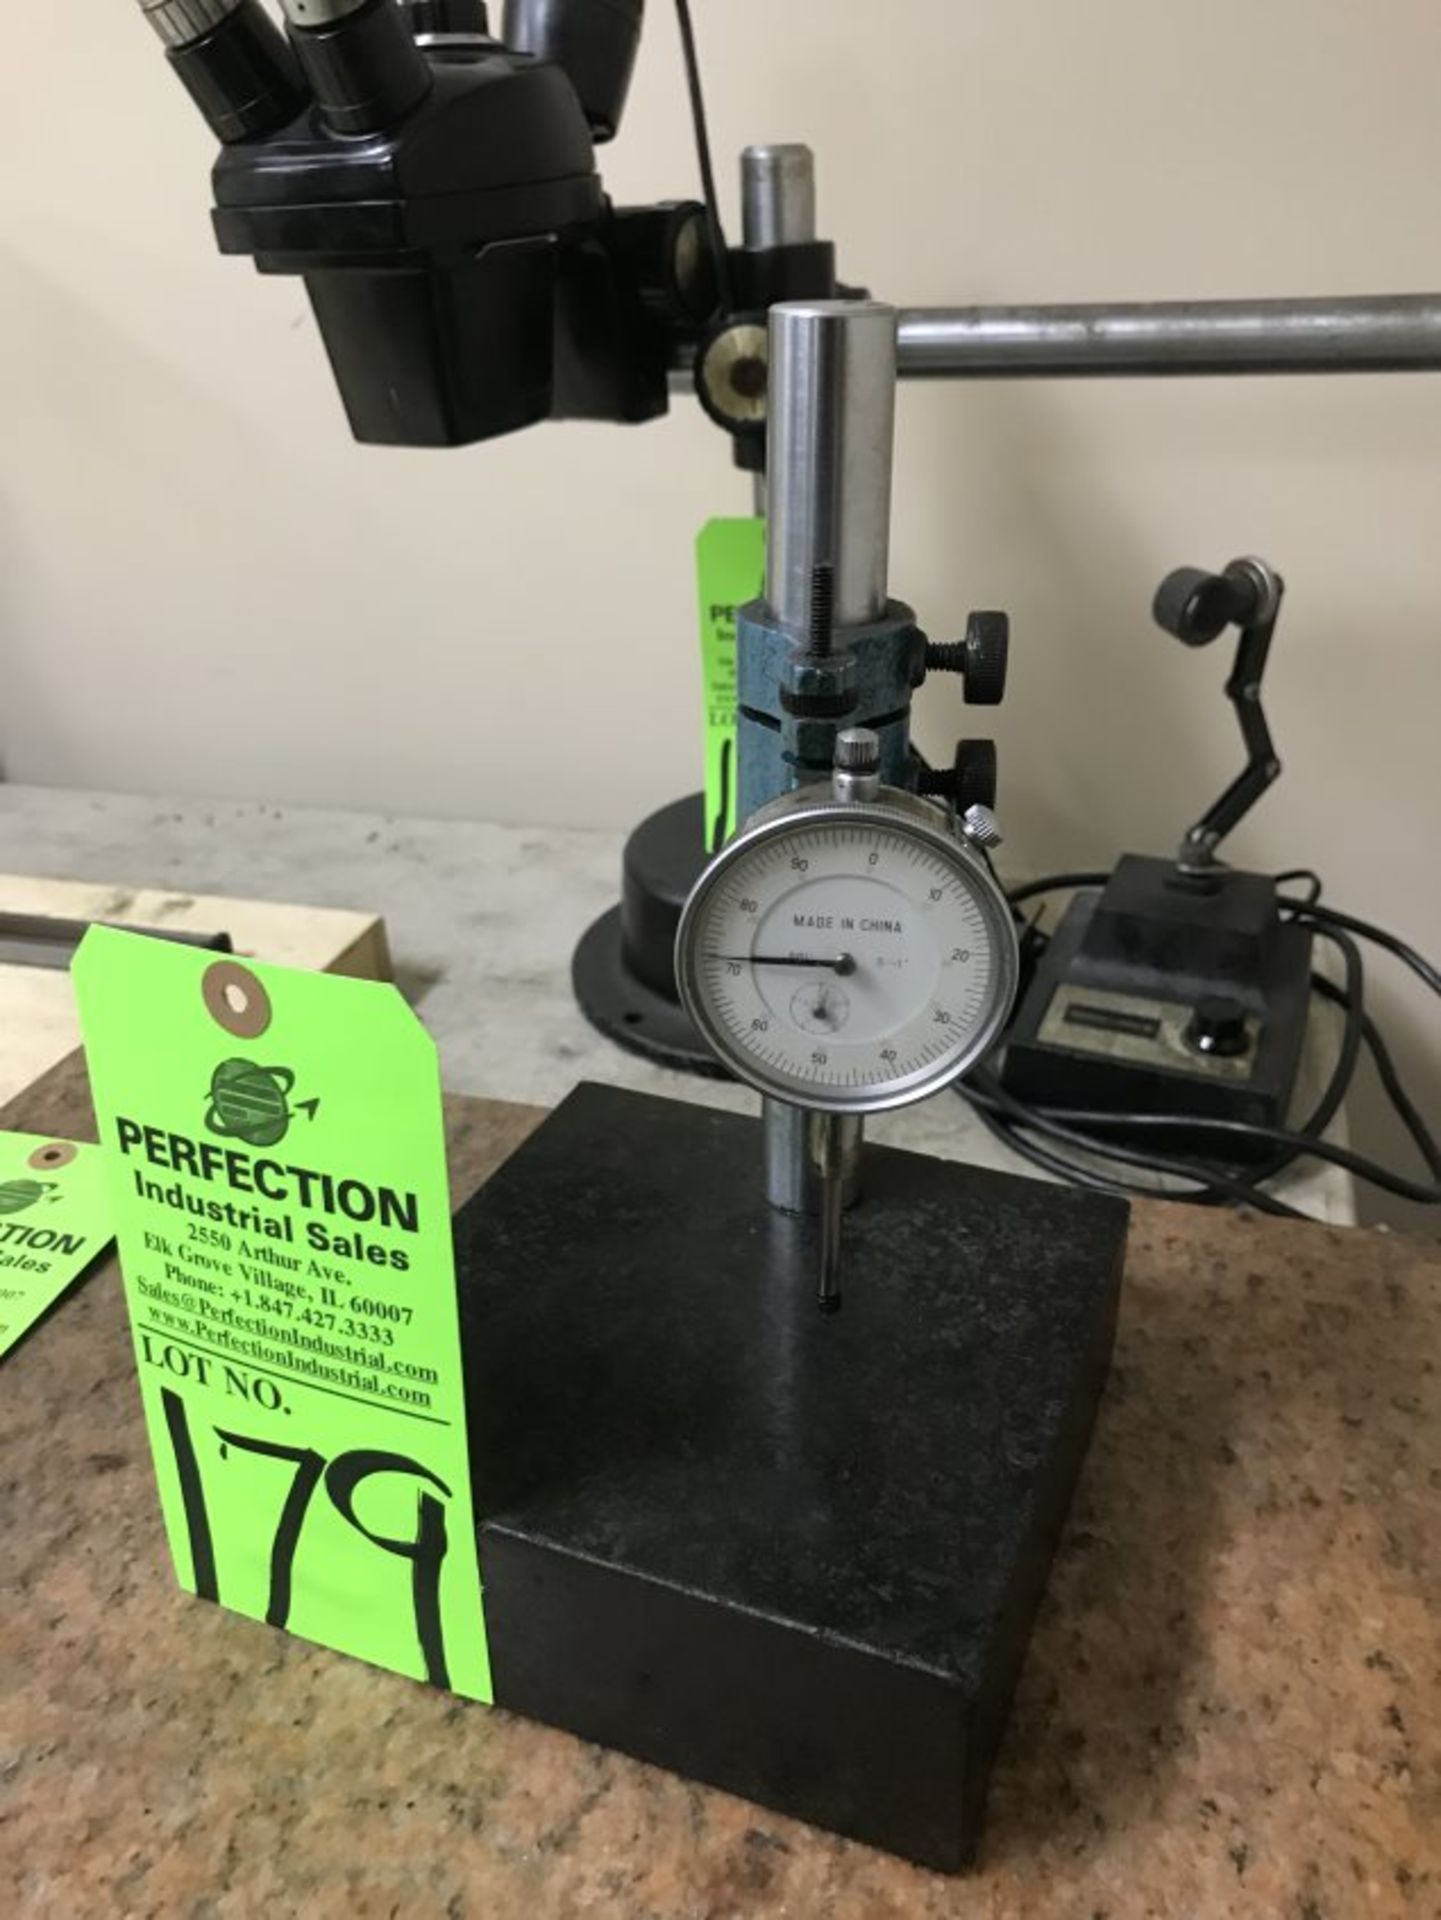 6" x 6" Comparator Stand w/ Drop Indicator